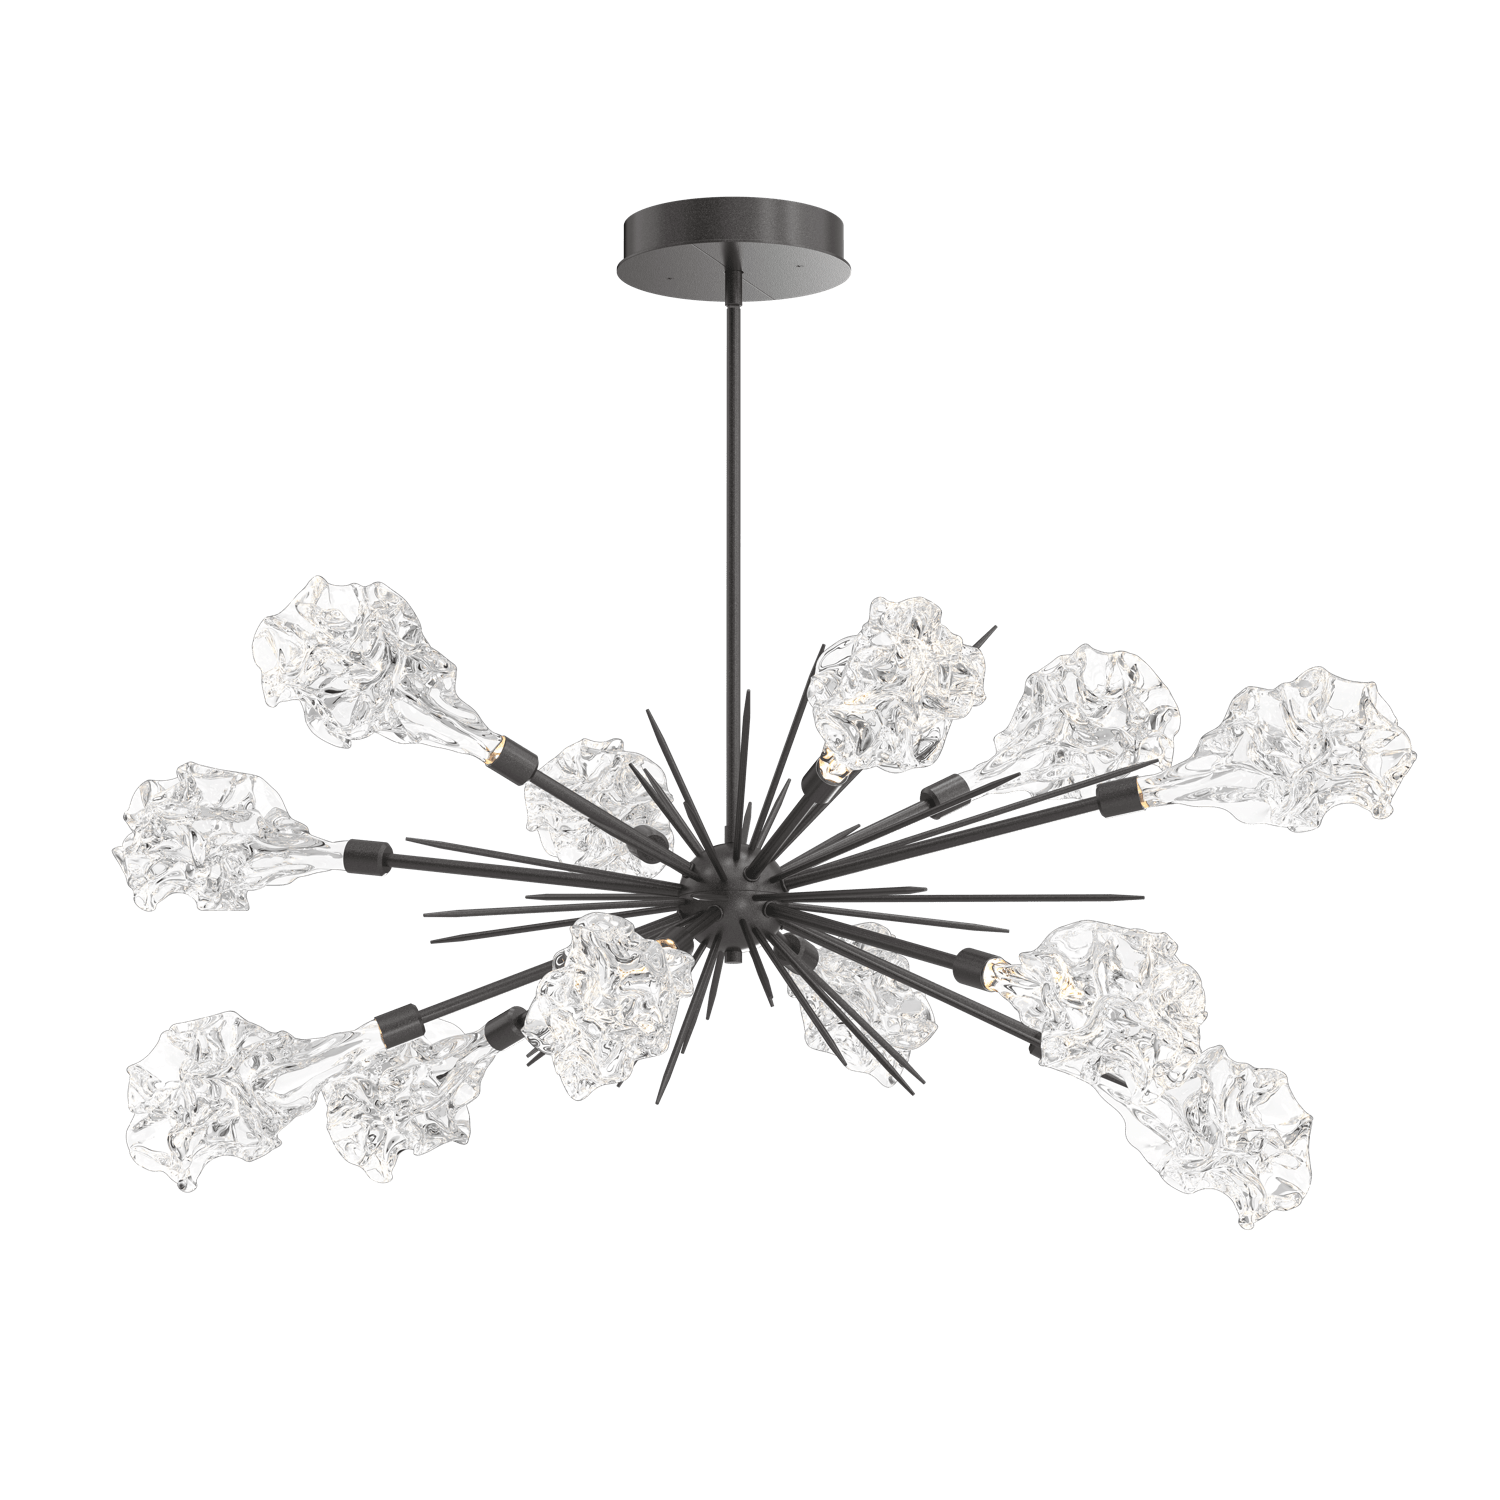 PLB0059-0A-GP-Hammerton-Studio-Blossom-47-inch-oval-starburst-chandelier-with-graphite-finish-and-clear-handblown-crystal-glass-shades-and-LED-lamping